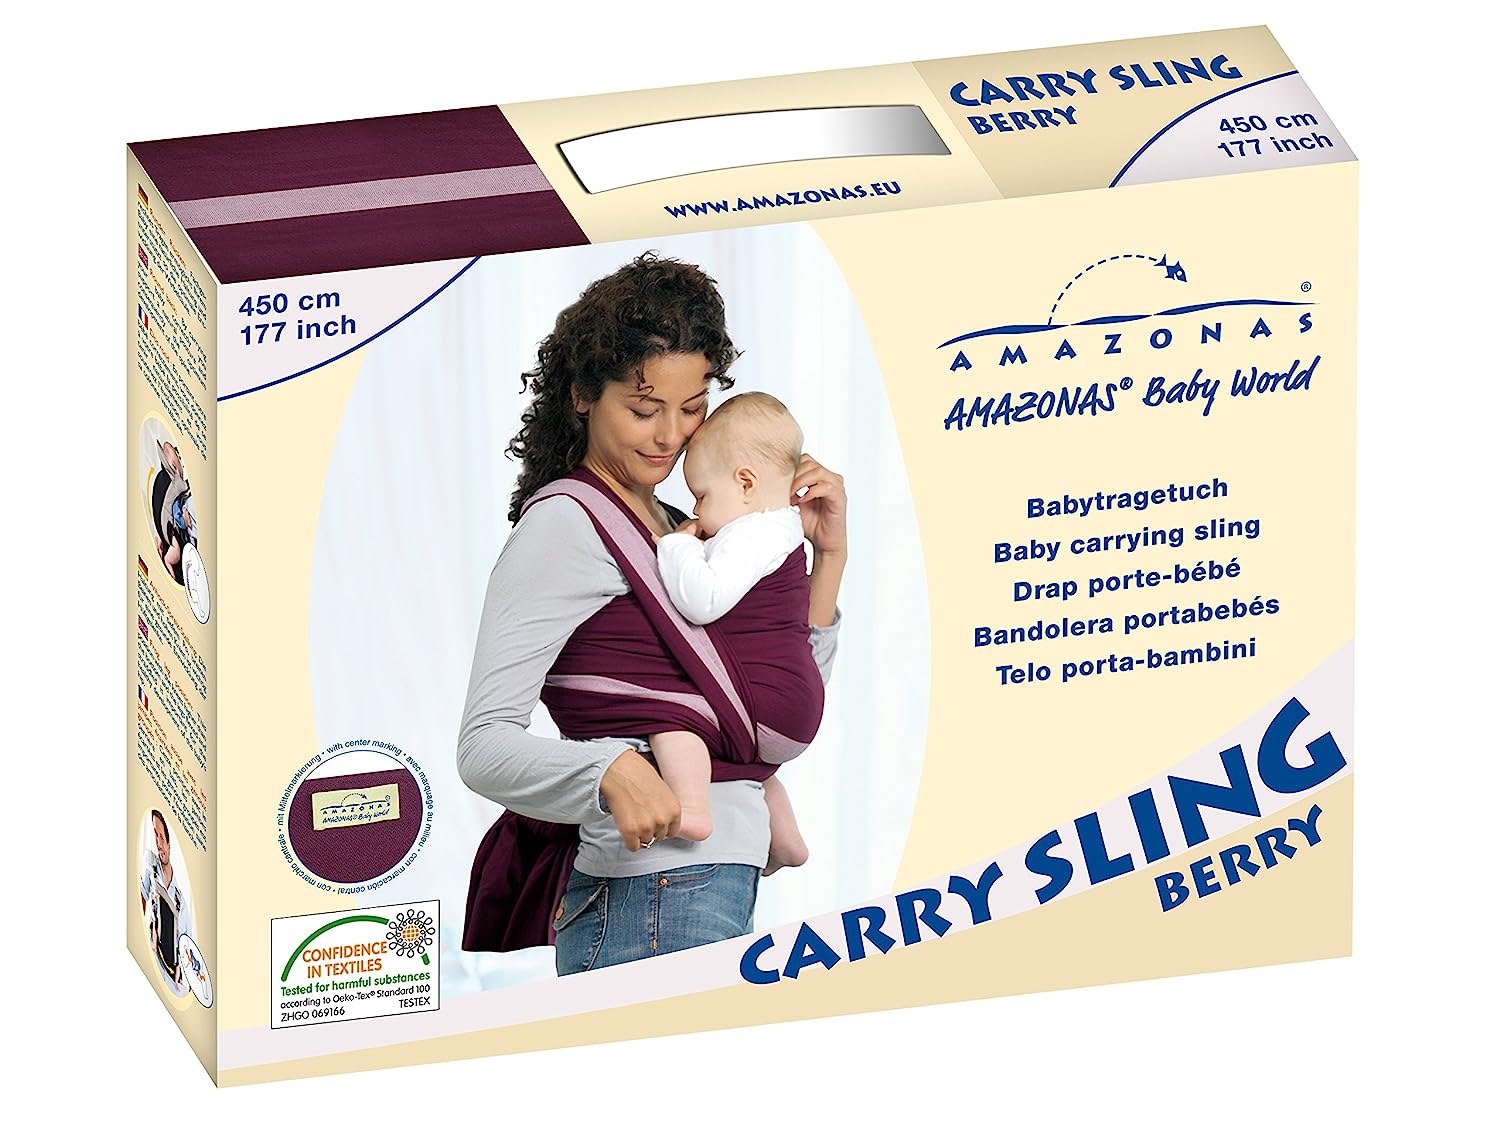 AMAZONAS Carrageen Baby Sling - Test Winner at Stiftung Warentest with Top Score 1.7-510 cm 0-3 Years up to 15 kg in Blue Stripes